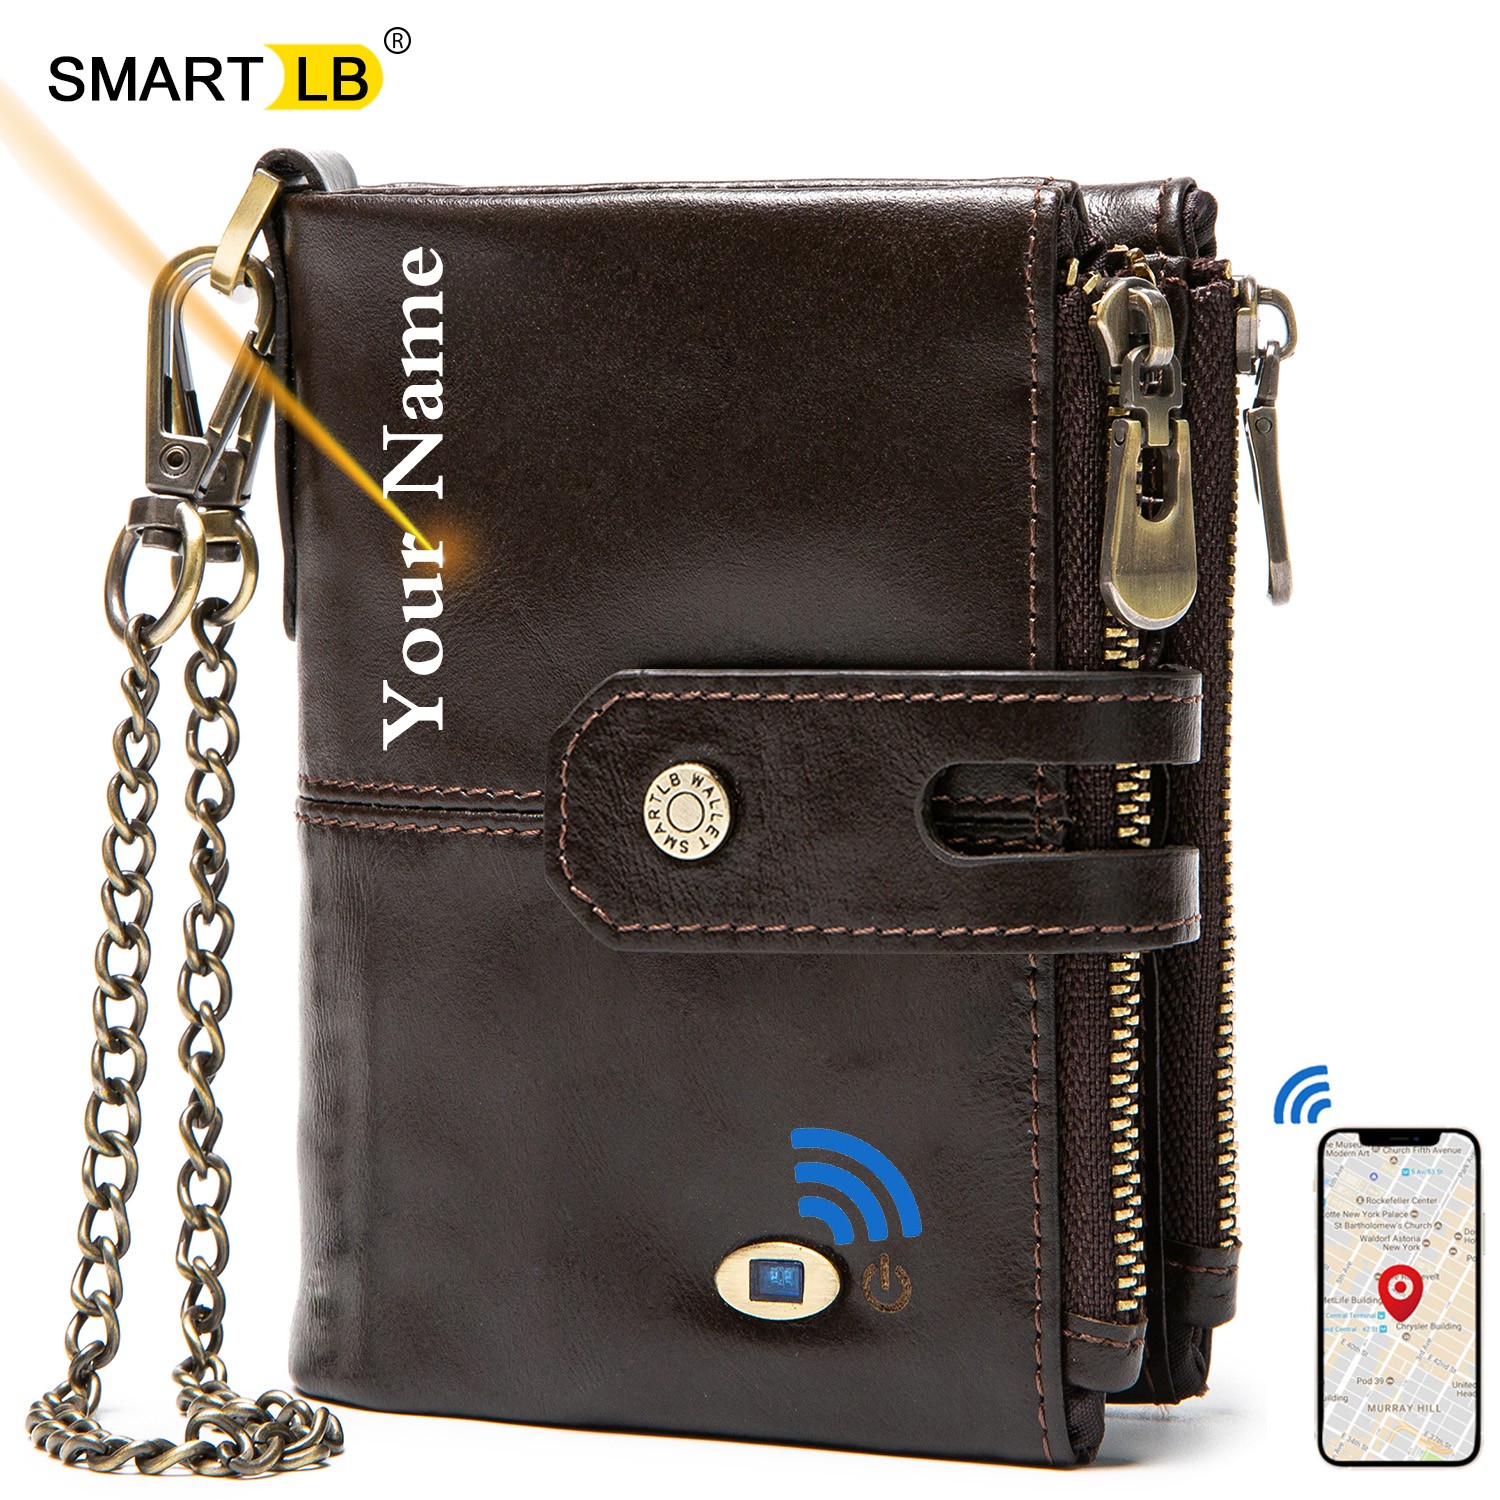 Smart Anti-lost Wallet GPS Record Genuine Leather Men Wallets Zipper Coin Pocket Chain Purse Card Holder Wallet Free Engraving